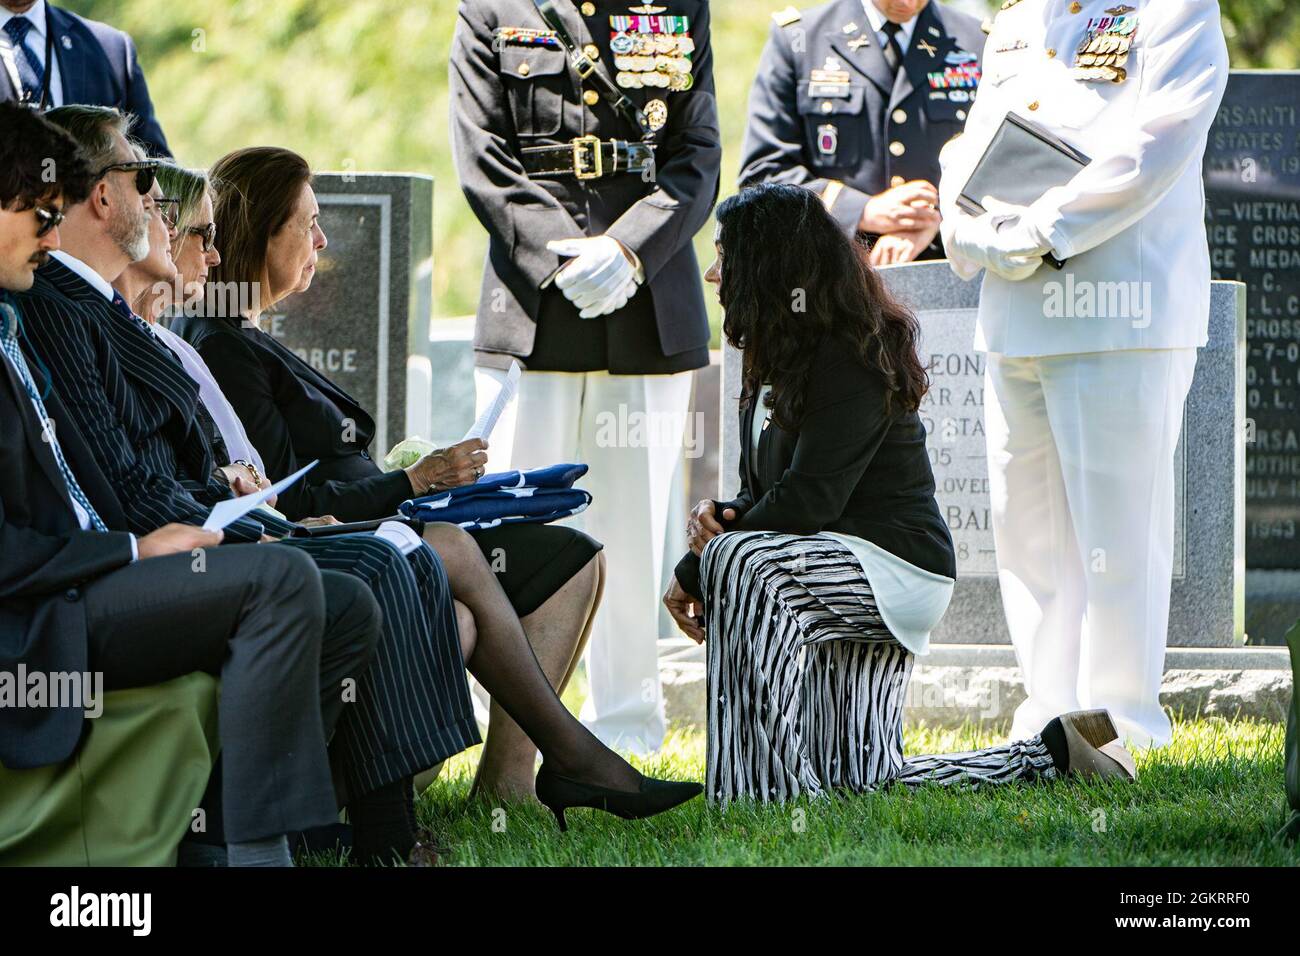 Karen Durham-Aguilera (right), executive director, Army National Military Cemeteries; gives condolences on behalf of Arlington National Cemetery to Jeanne Warner during the funeral service of Warner’s husband, U.S. Marine Corps 1st Lt. John Warner, in Section 4 of Arlington National Cemetery, Arlington, Virginia, June 23, 2021.    Former Senator for Virginia and former Secretary of the Navy, Warner was born on Feb. 18, 1927 in Washington, D.C. He joined the U.S. Navy at age 17 in 1945 and served during the final months of World War II. After graduating from the University of Virginia School of Stock Photo